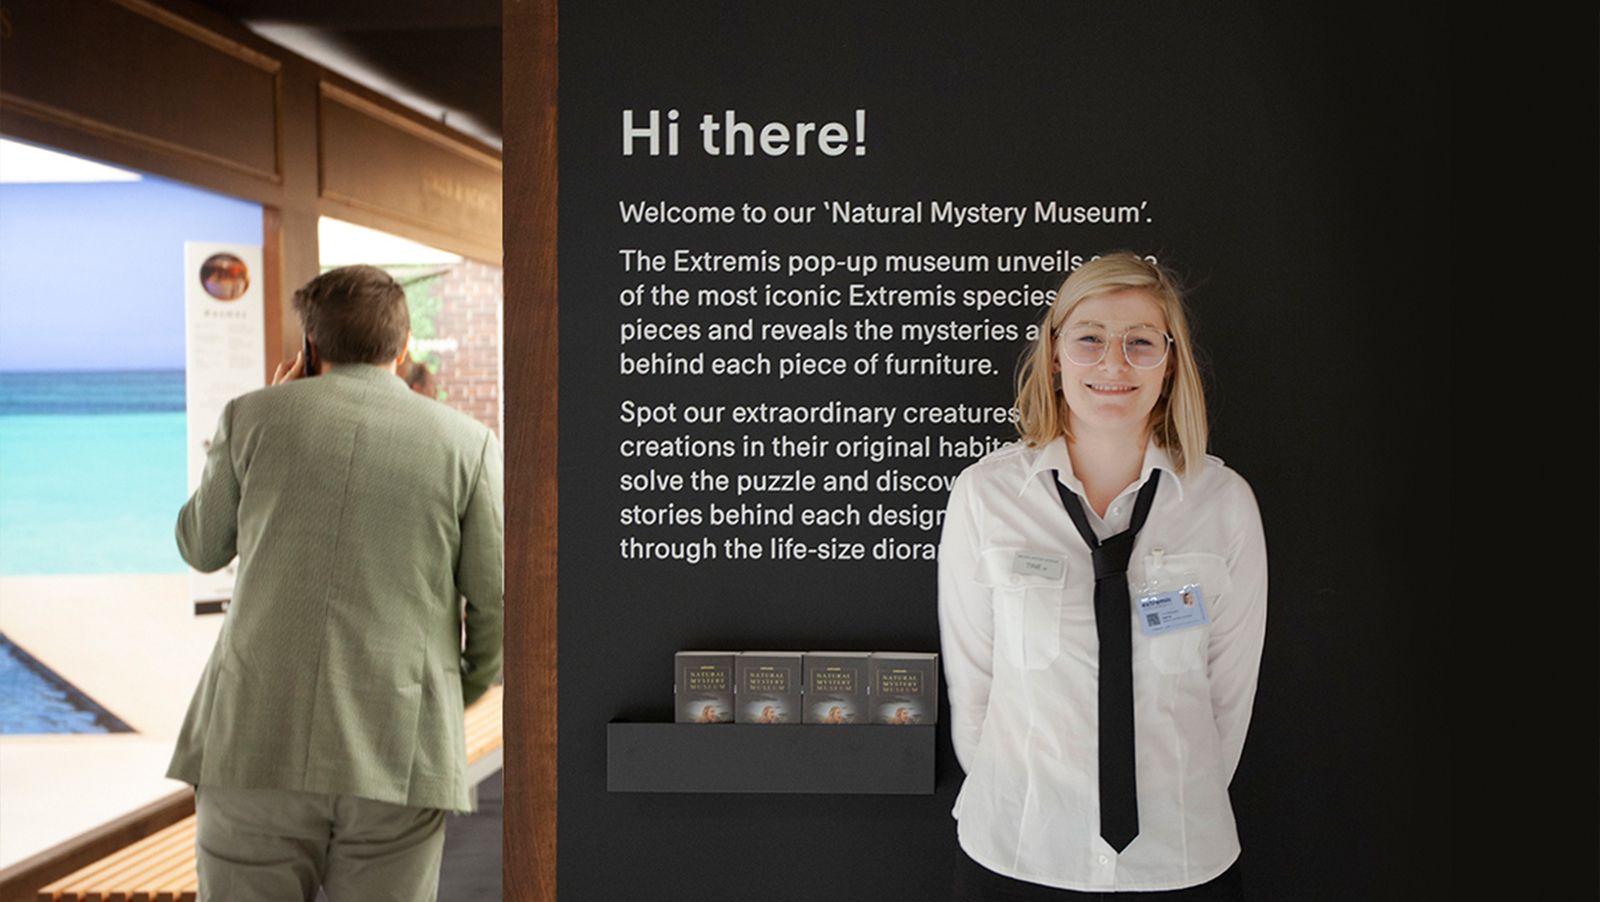 This was our natural mistery museum